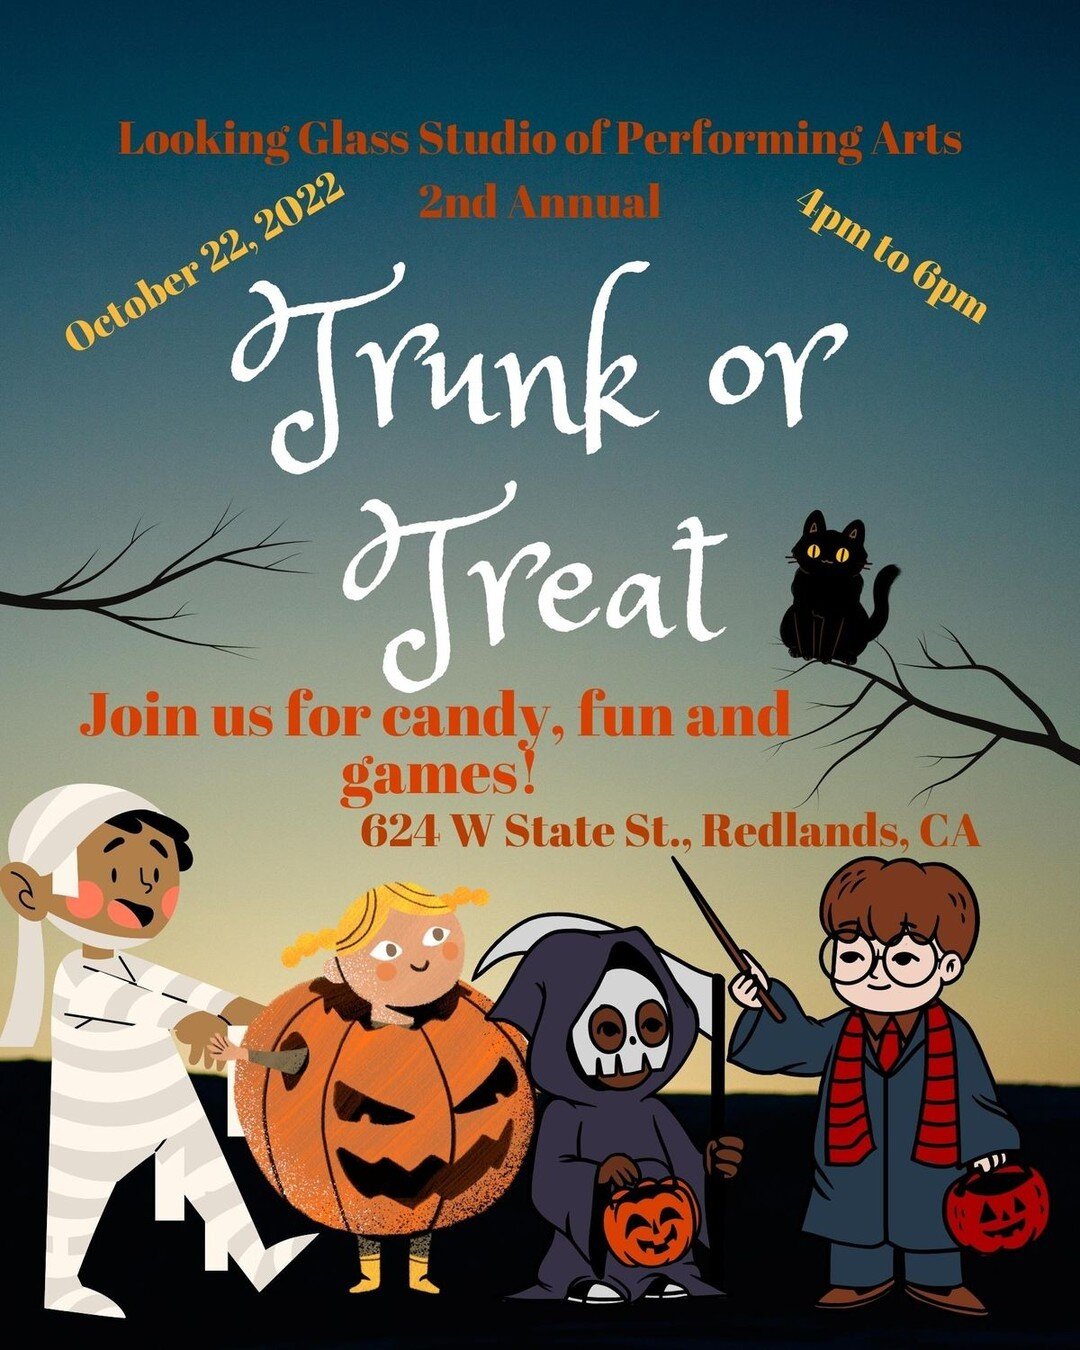 Come one! Come ALL!!!

Join us October 22nd, 2022 from 4pm to 6pm for our 2nd annual Trunk or Treat event! 

This event is FREE!!! And open to ANYONE.

We will have candy, dancing, and games!!

Hope to see you there!!!!!

#redlands #lgspa #lookinggla